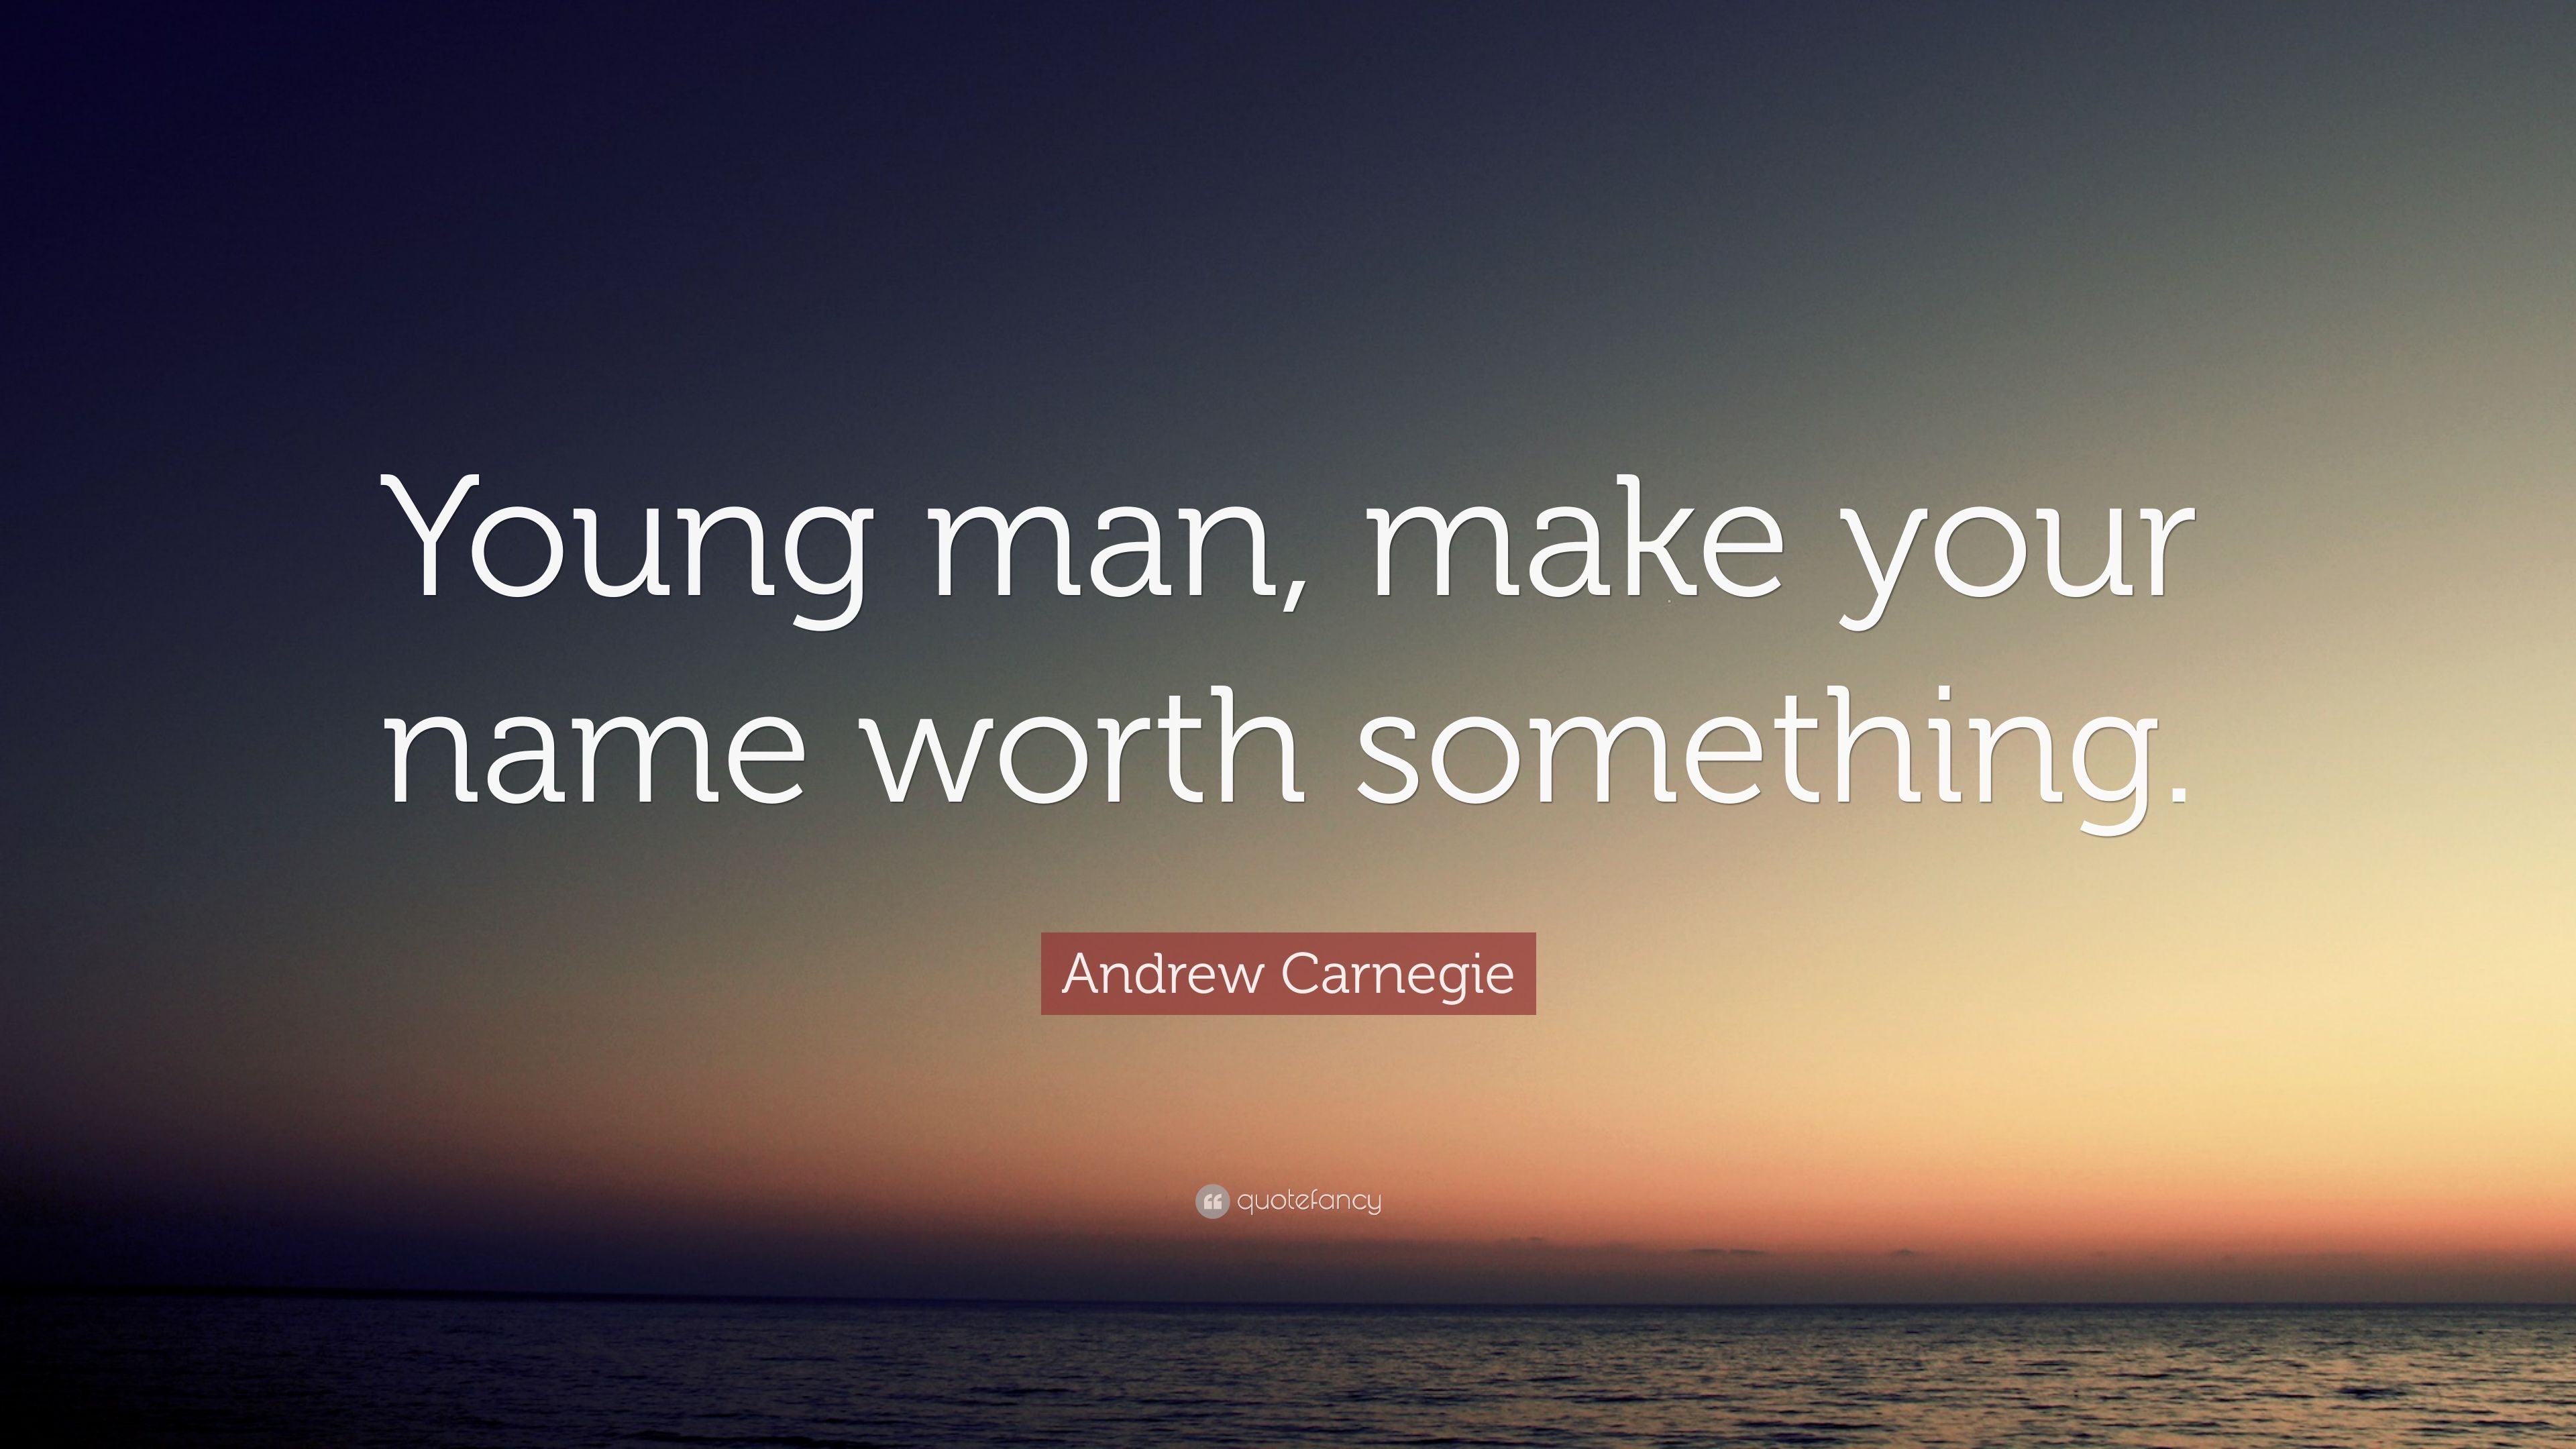 Andrew Carnegie Quote: “Young man, make your name worth something